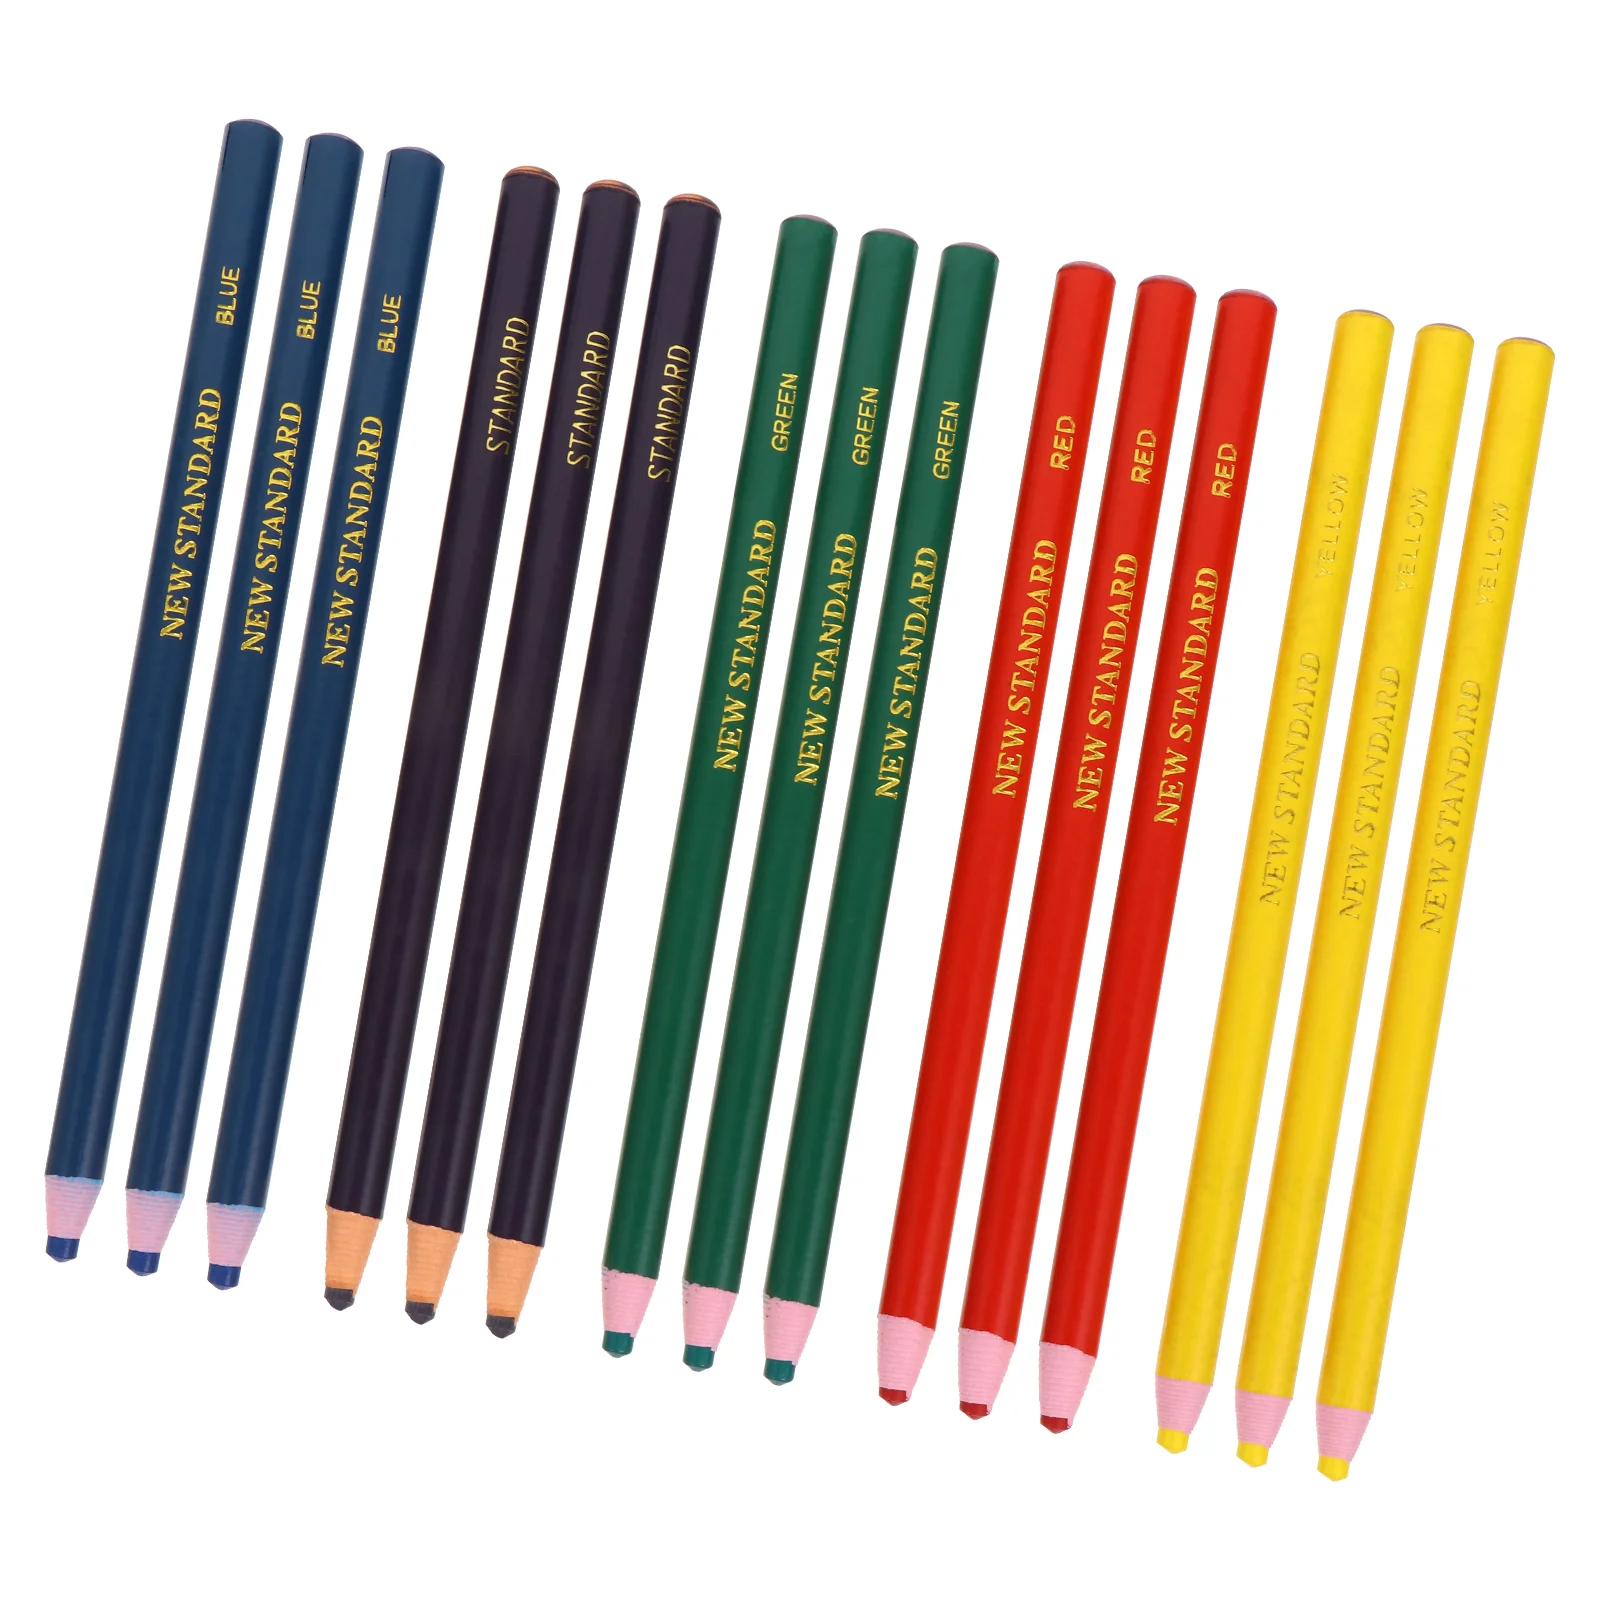 

15 Pcs Pull Crayons Childrens Pencils Creative Roll Paper Stationery For Painting Wood Peel-off Marker Grease Wax ZChild Colour